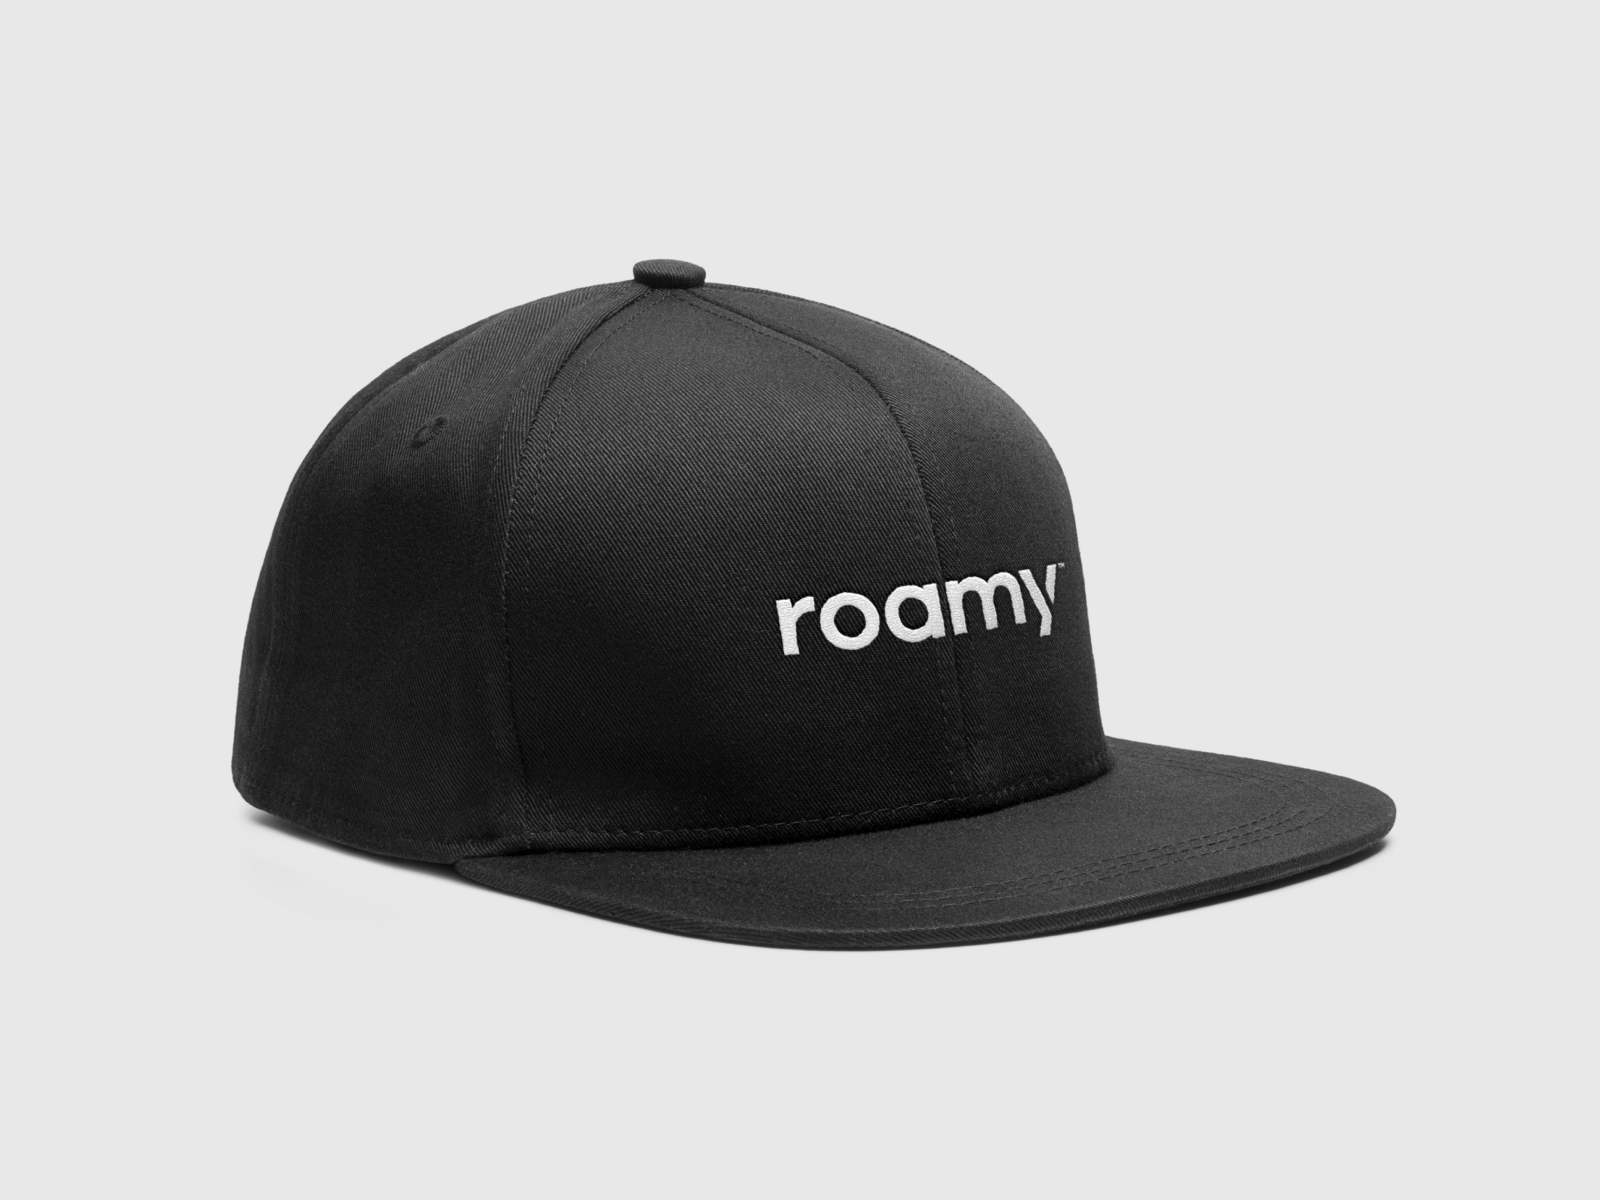 Roamy Logo by Ted Kulakevich on Dribbble